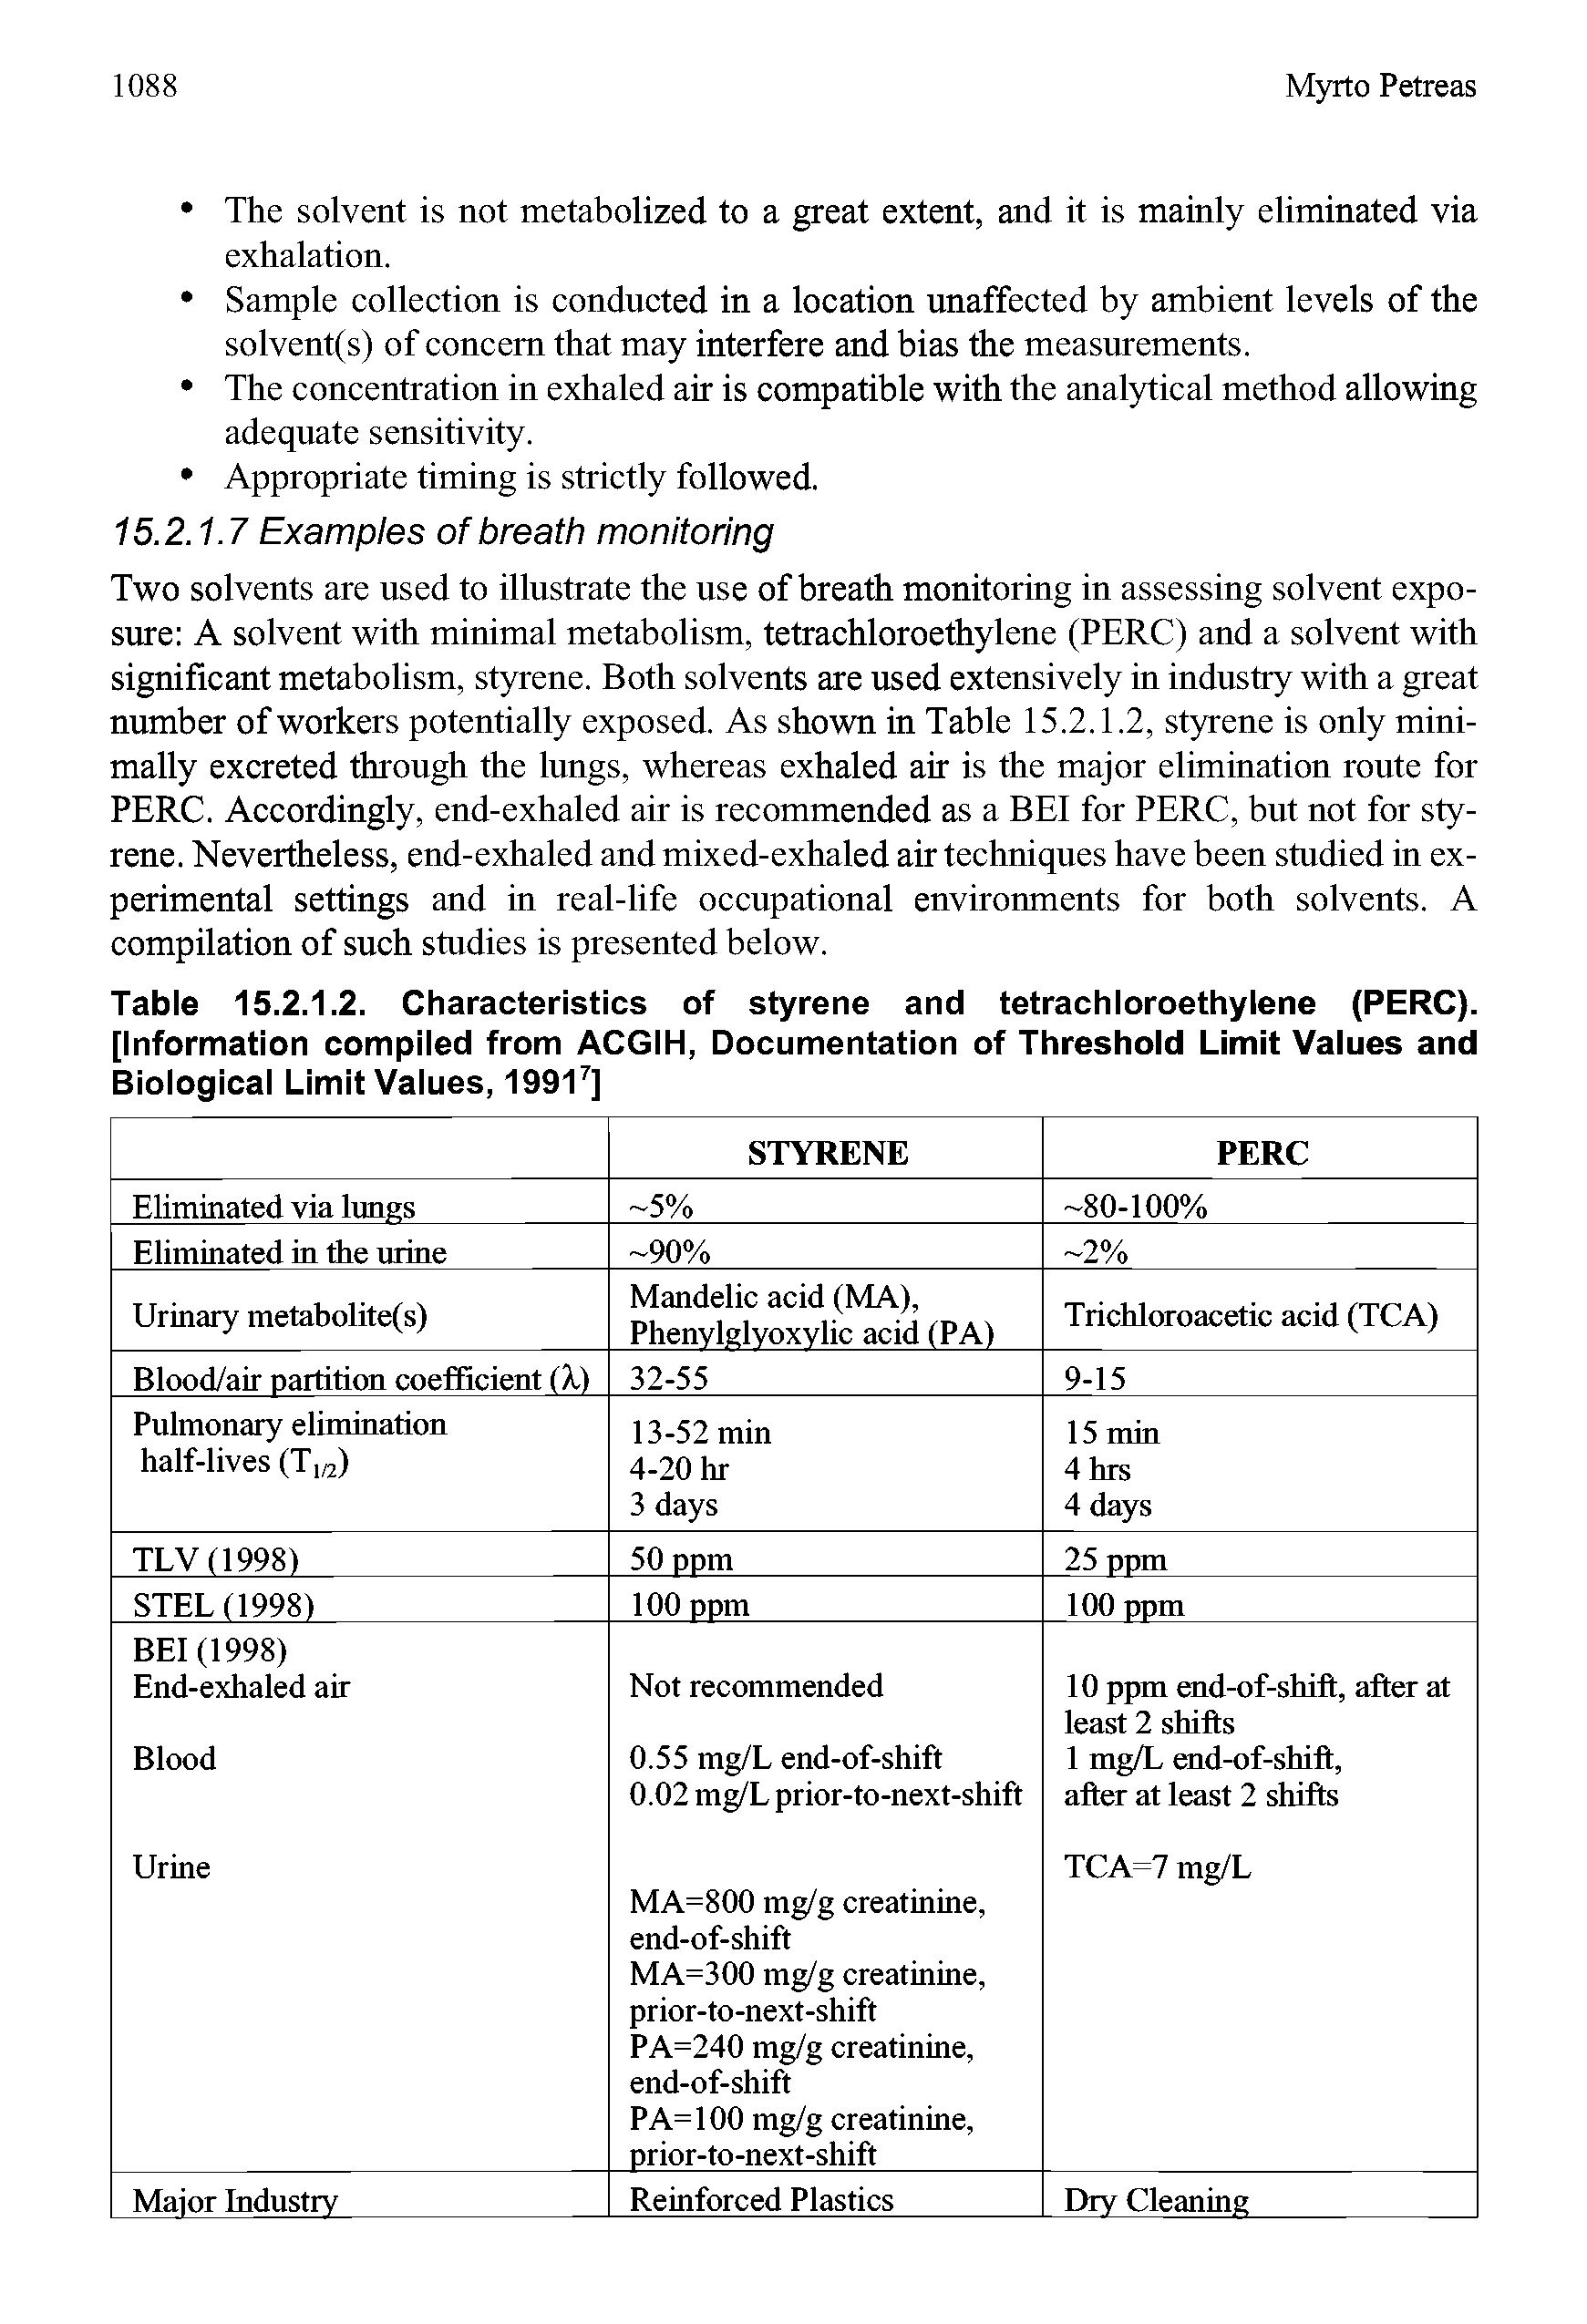 Table 15.2.1.2. Characteristics of styrene and tetrachloroethylene (PERC). [Information compiled from ACGIH, Documentation of Threshold Limit Values and Biological Limit Values, 1991 ]...